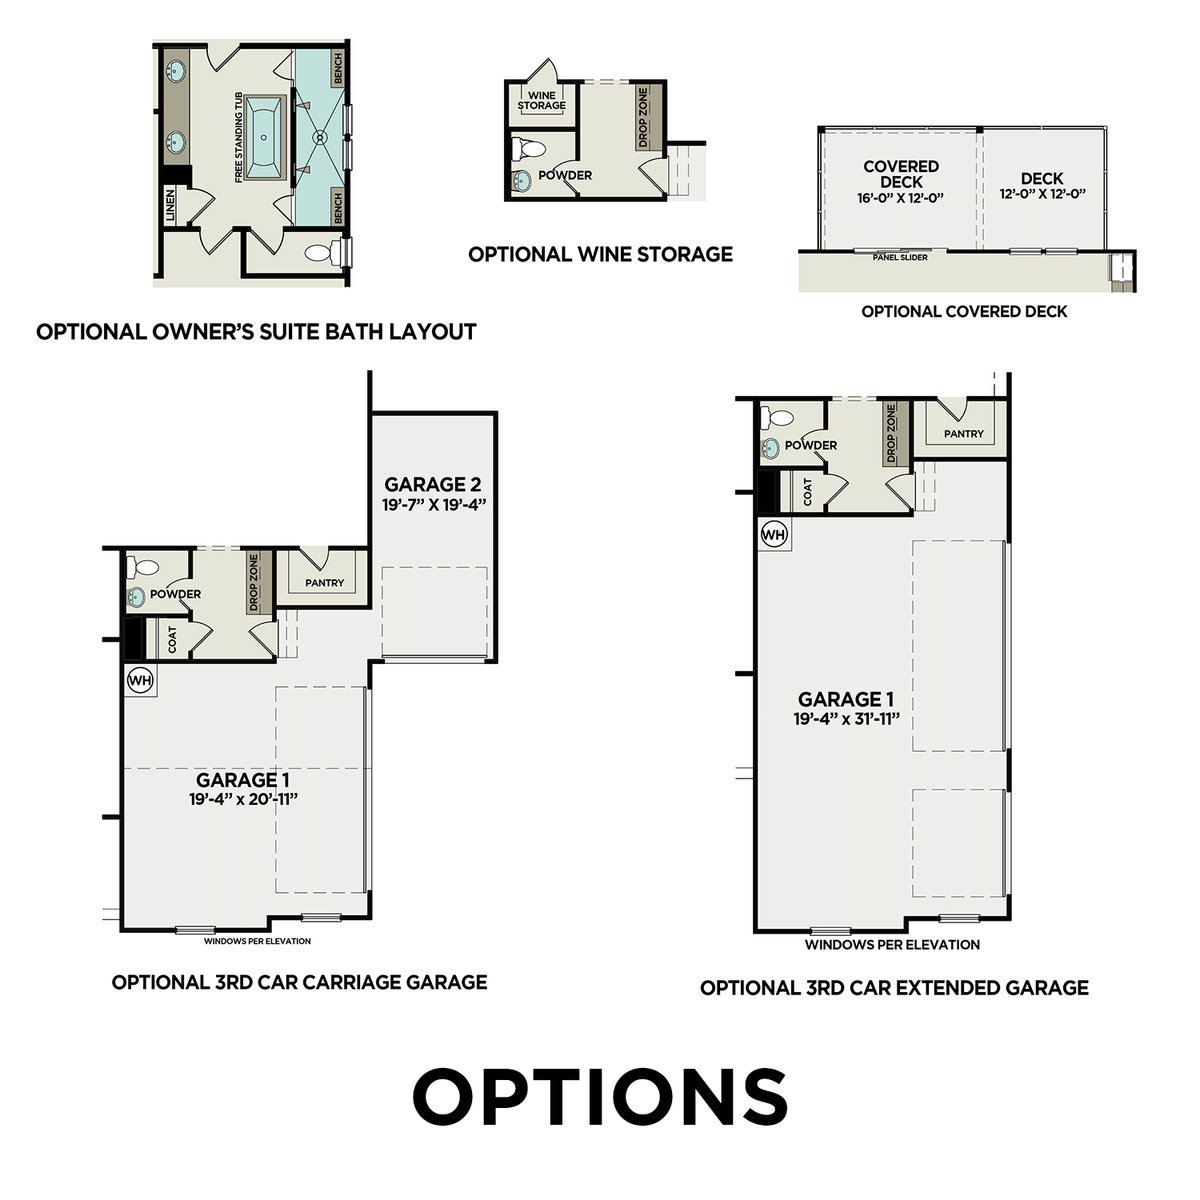 4 - The Arlington B floor plan layout for 2750 Twisted Oak Lane in Davidson Homes' Tanglewood community.